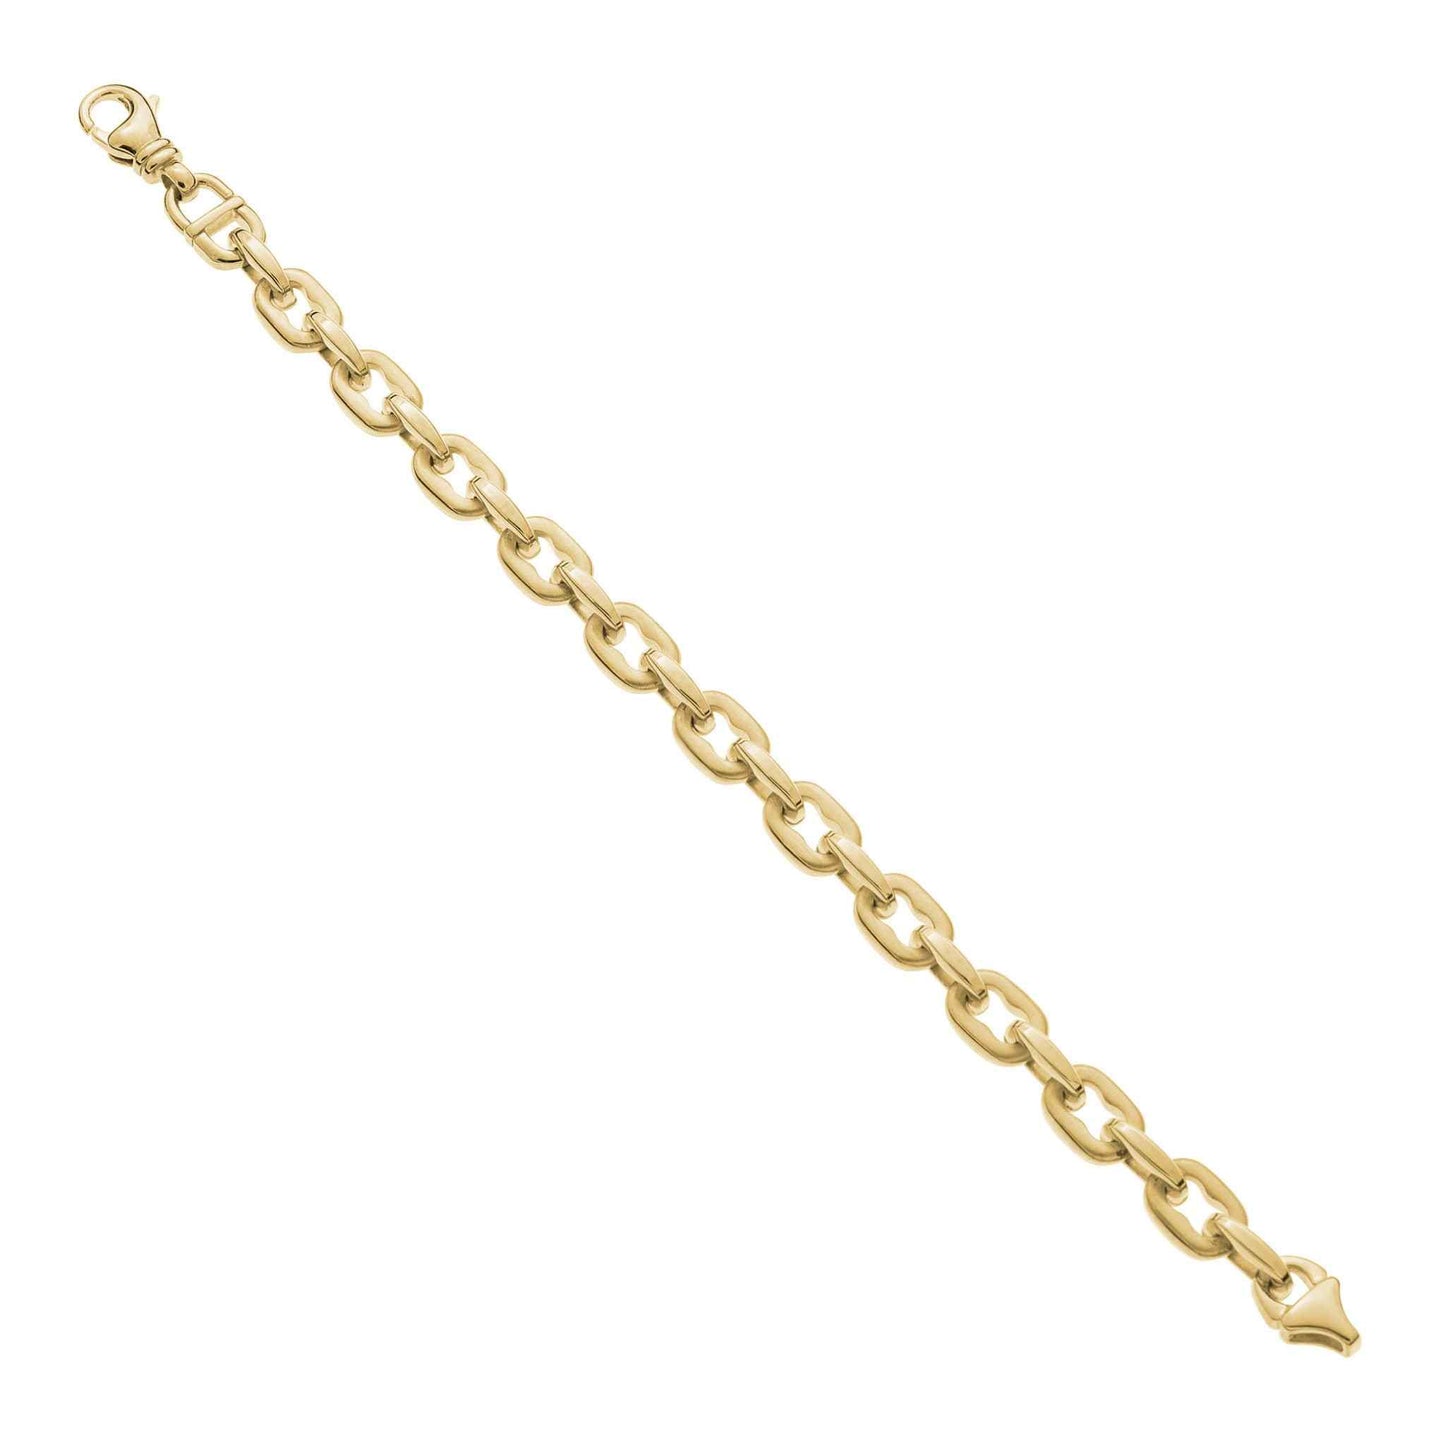 A large link cable bracelet displayed on a neutral white background.